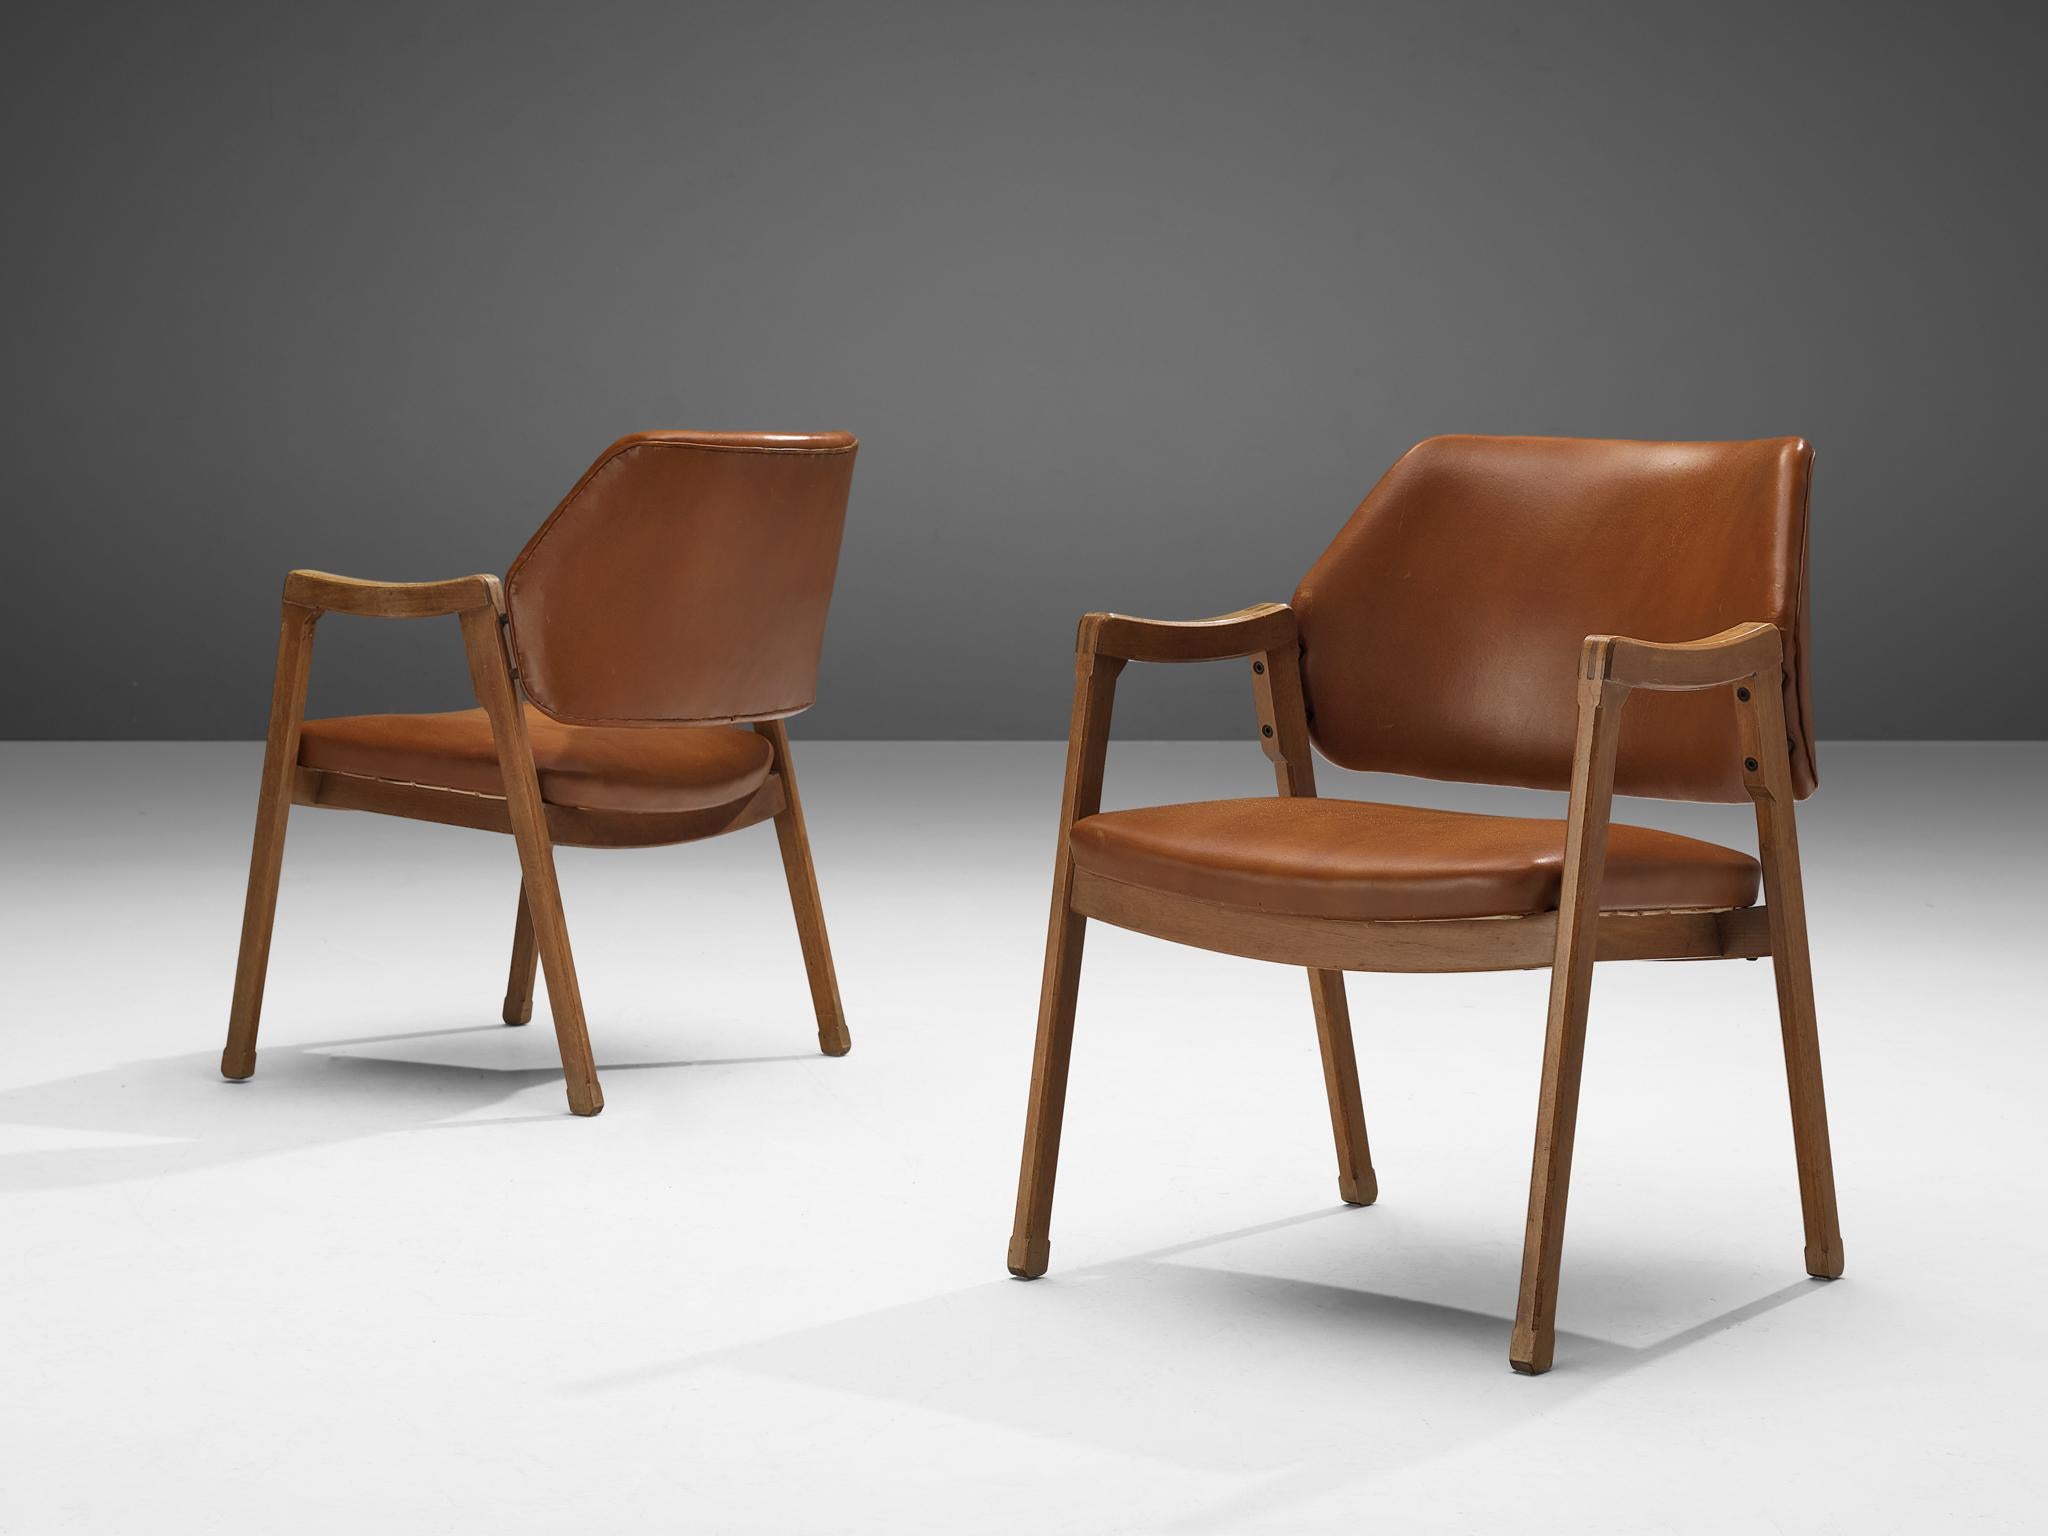 Ico Parisi for Cassina, pair of armchairs model '814', Italian walnut, cognac leather , Italy, 1963.

This pair of conference chairs '814' was executed to perfection and provide great comfort. These chairs look almost sculpted thanks to the